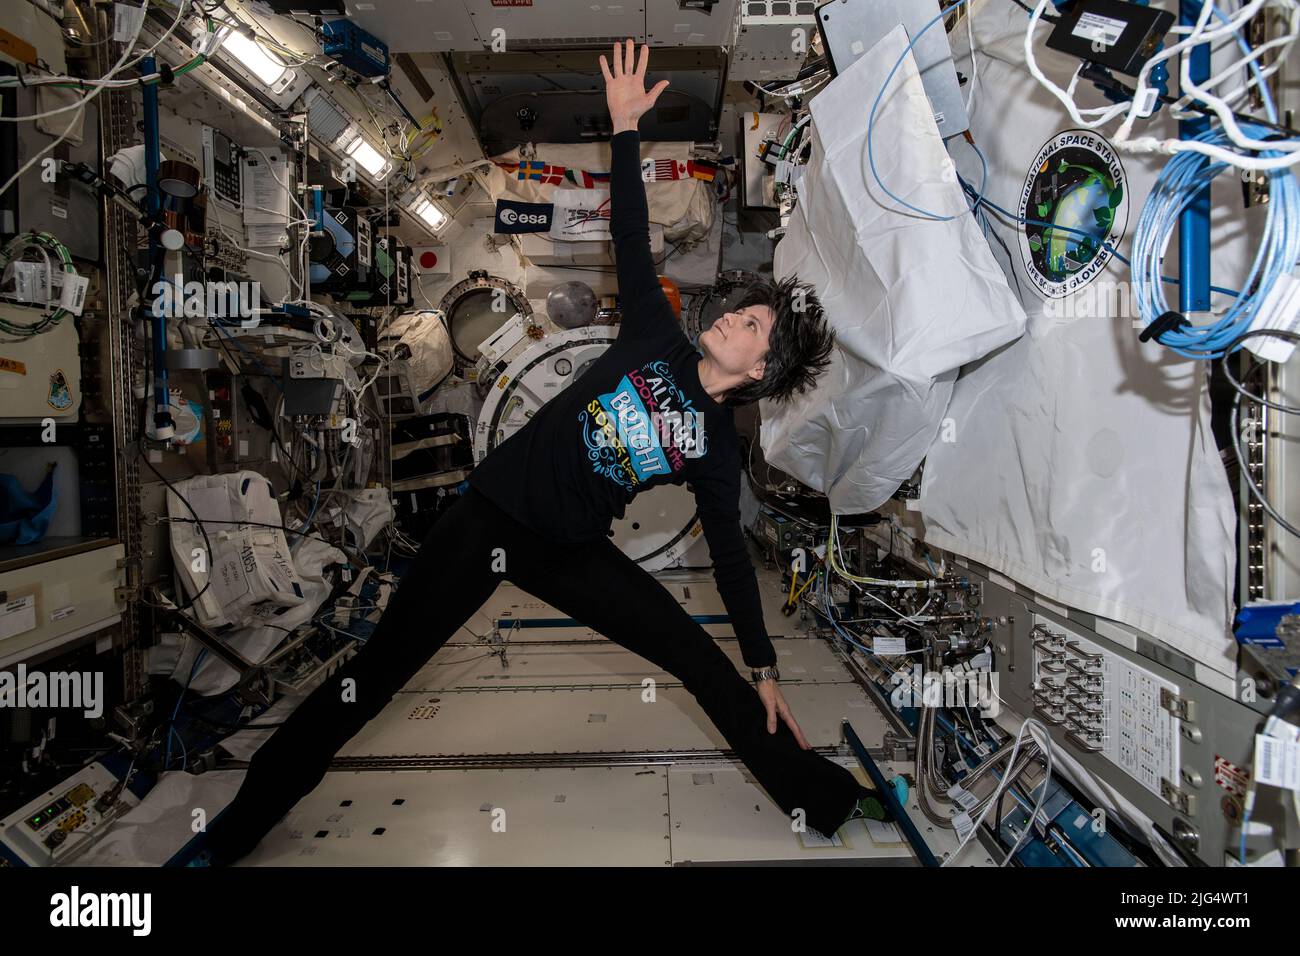 International Space Station Expedition 67 Flight Engineer Samantha Cristoforetti of the ESA, exercises and practices yoga maneuvers while attached to hand and foot rails inside the Kibo laboratory module aboard the orbiting spacelab, June 21, 2022 in Earth Orbit. Stock Photo